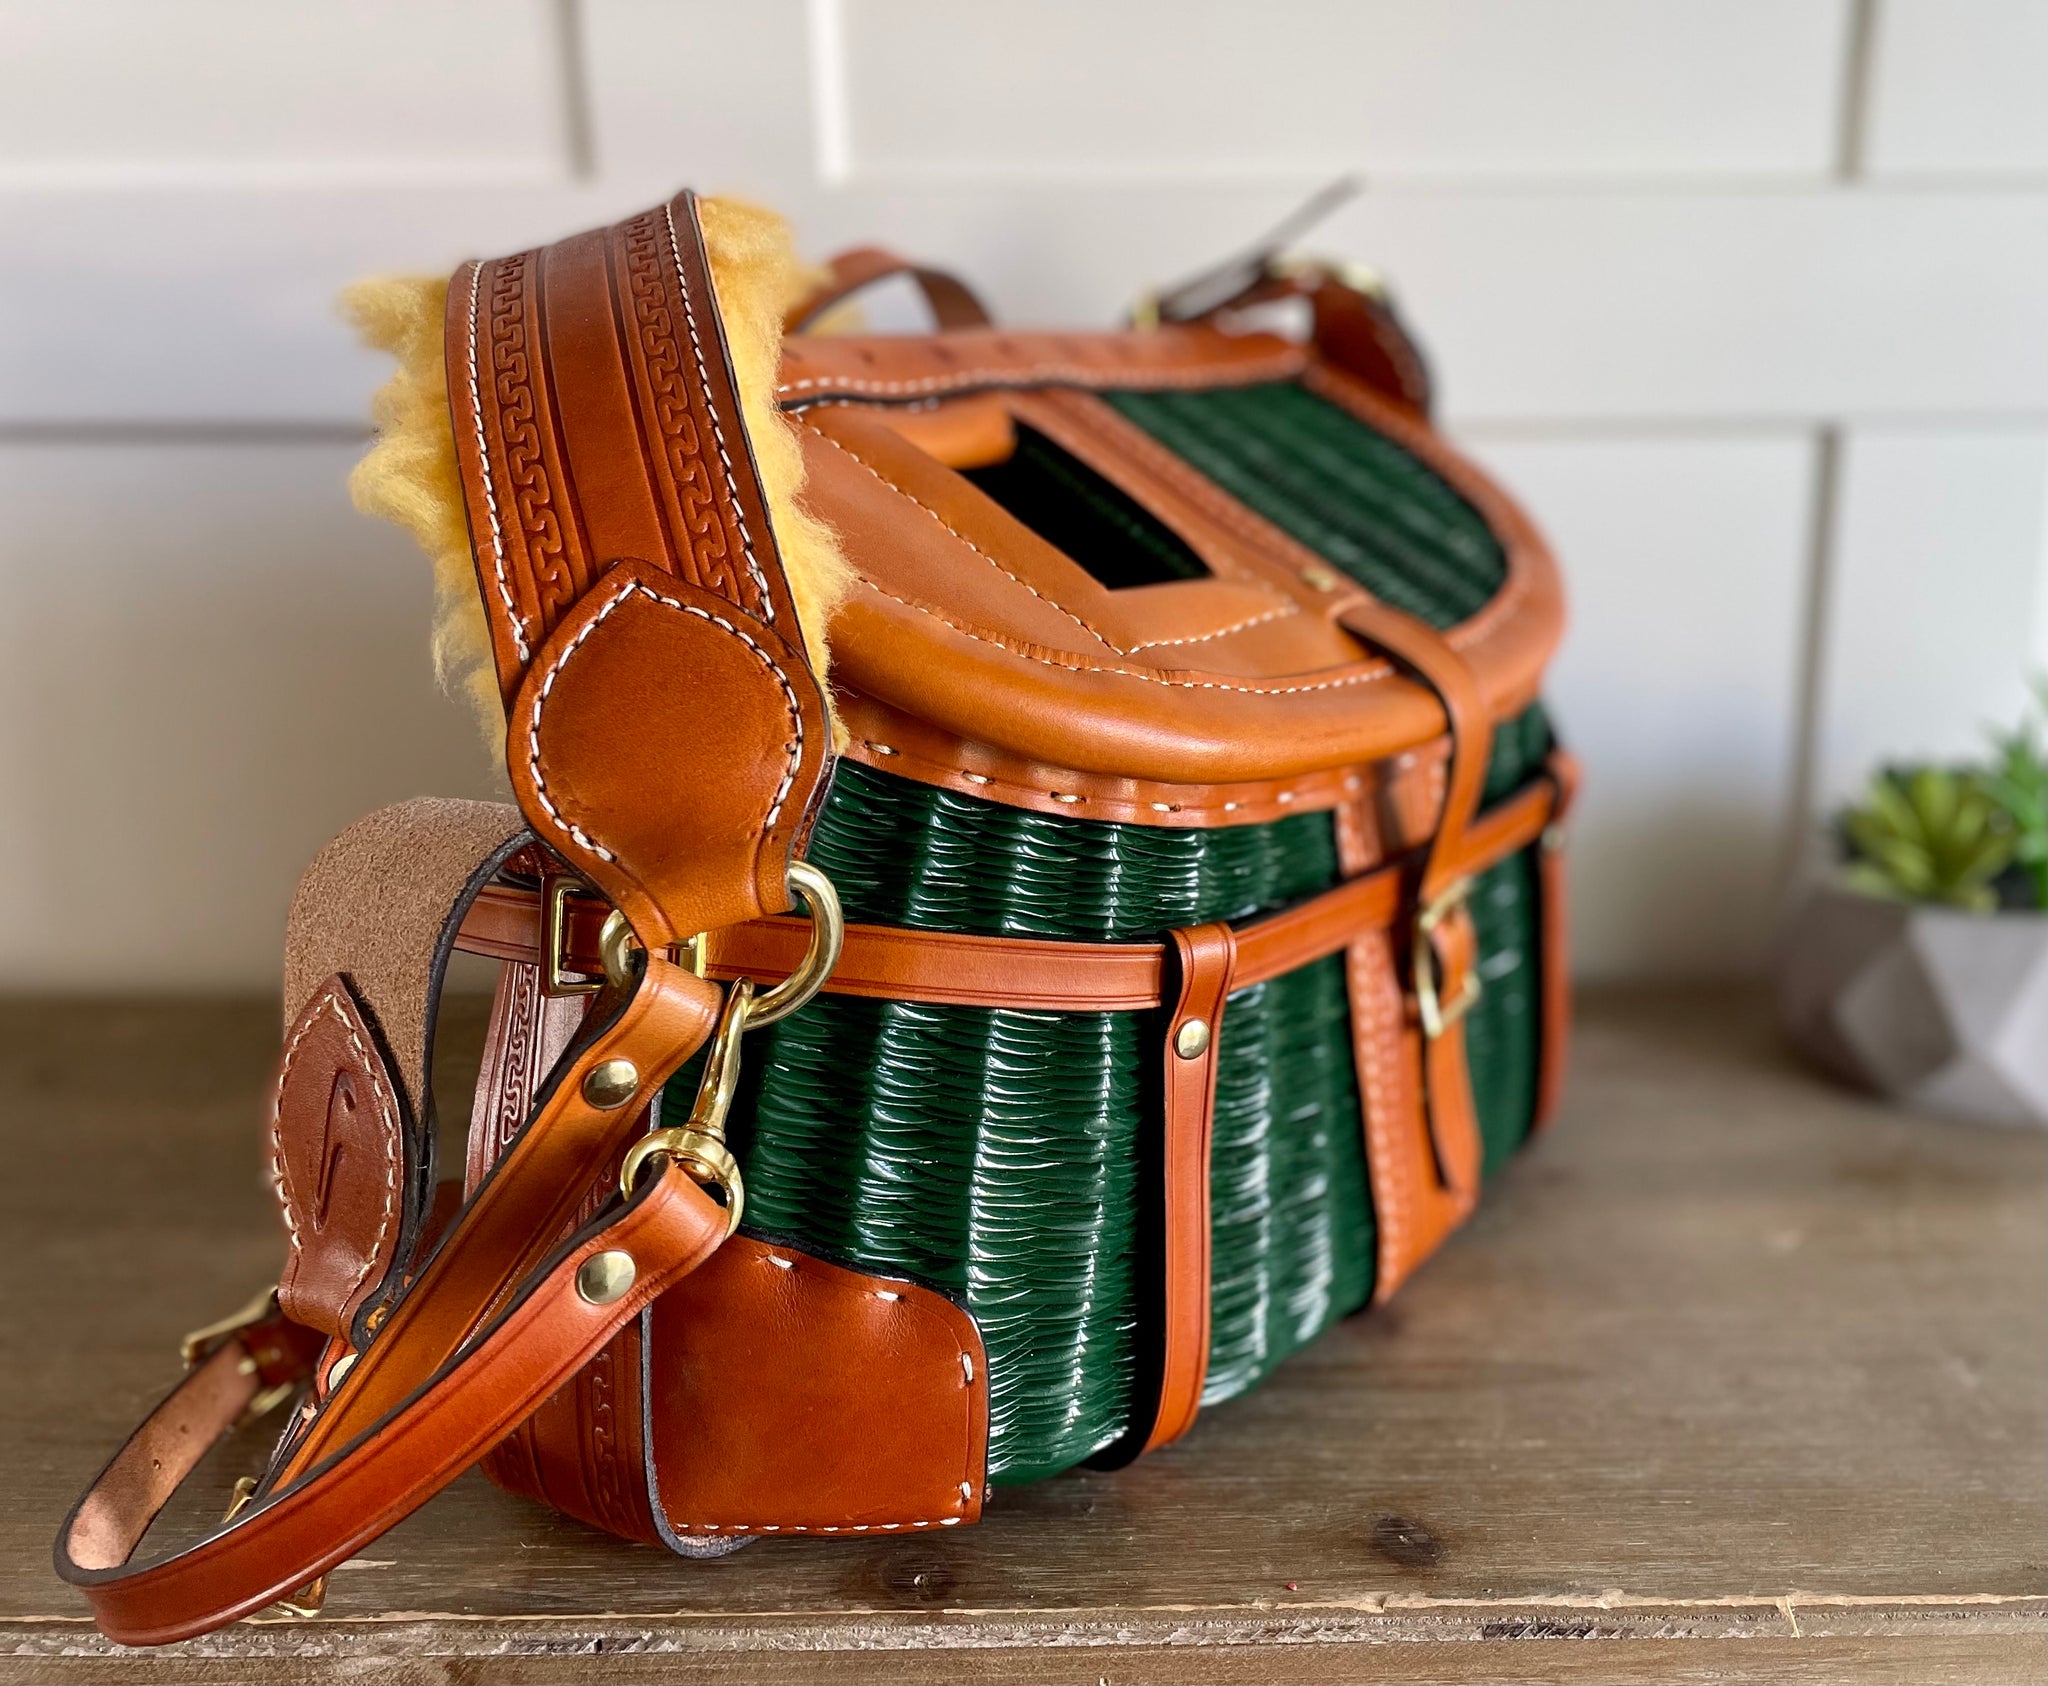 Lost River Leather